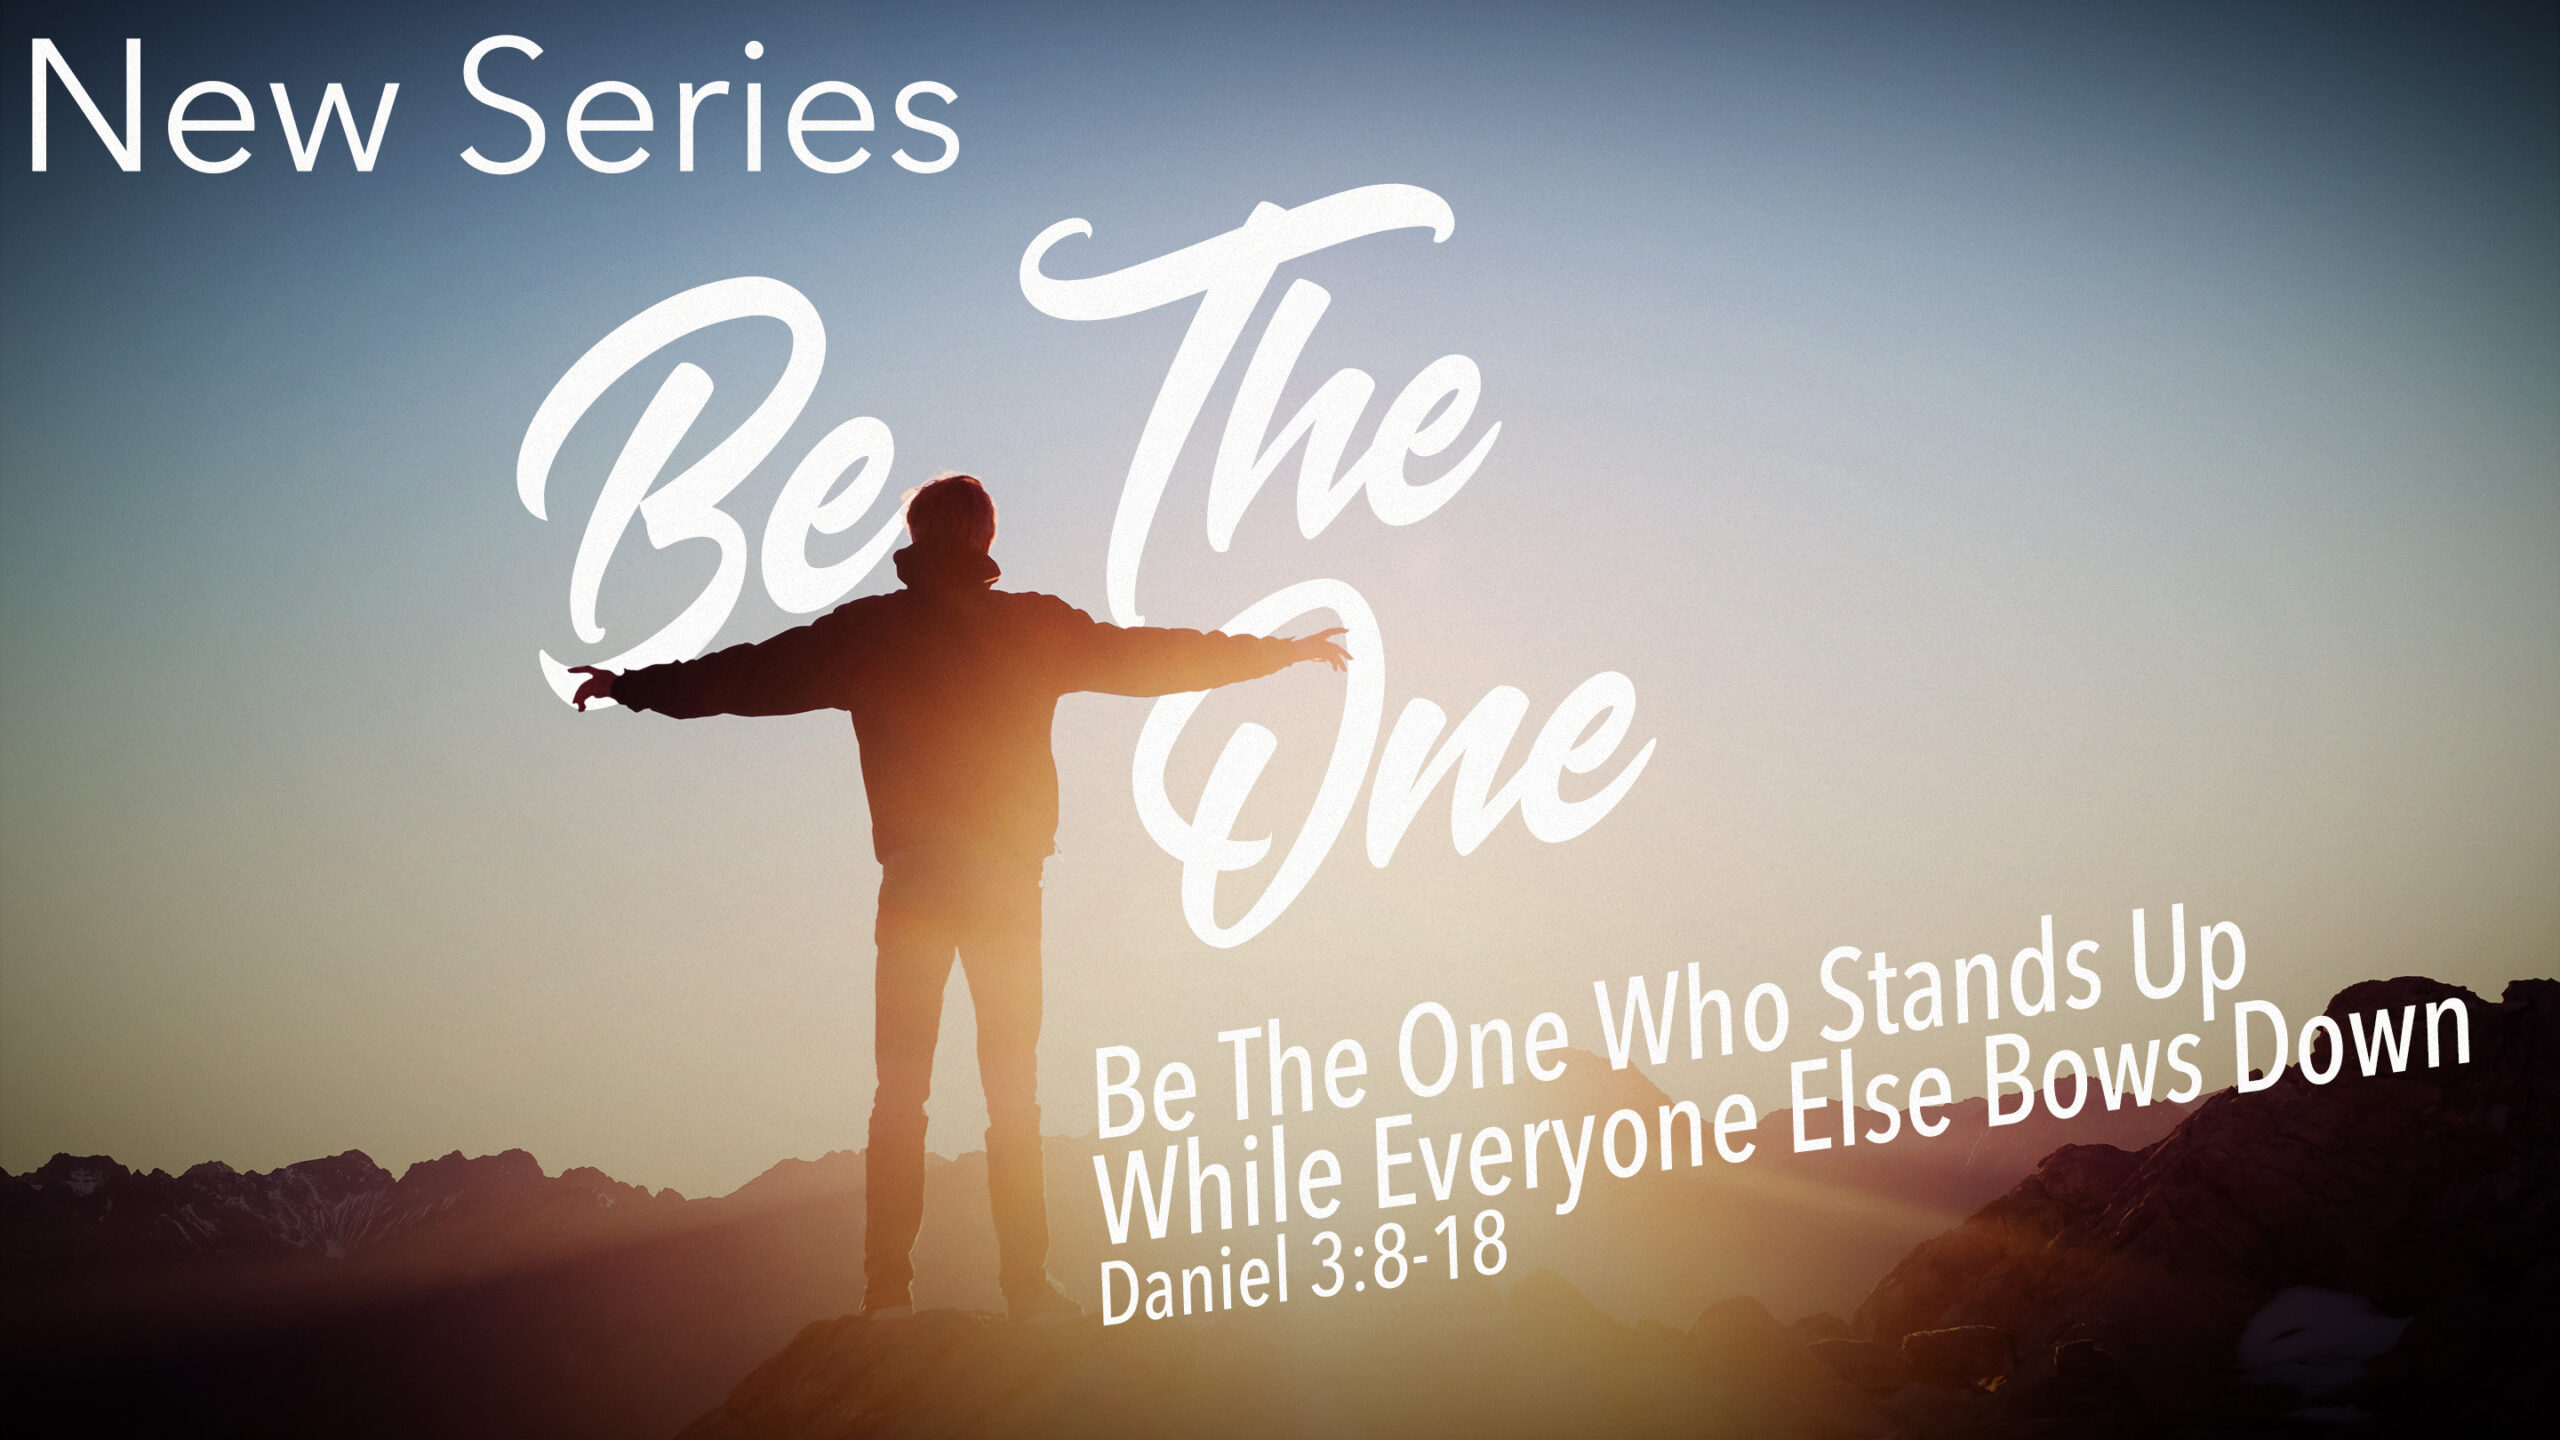 Be The One Part 1 “Be The One Who Stands Up While Everyone Else Bows Down” (THRIVE)